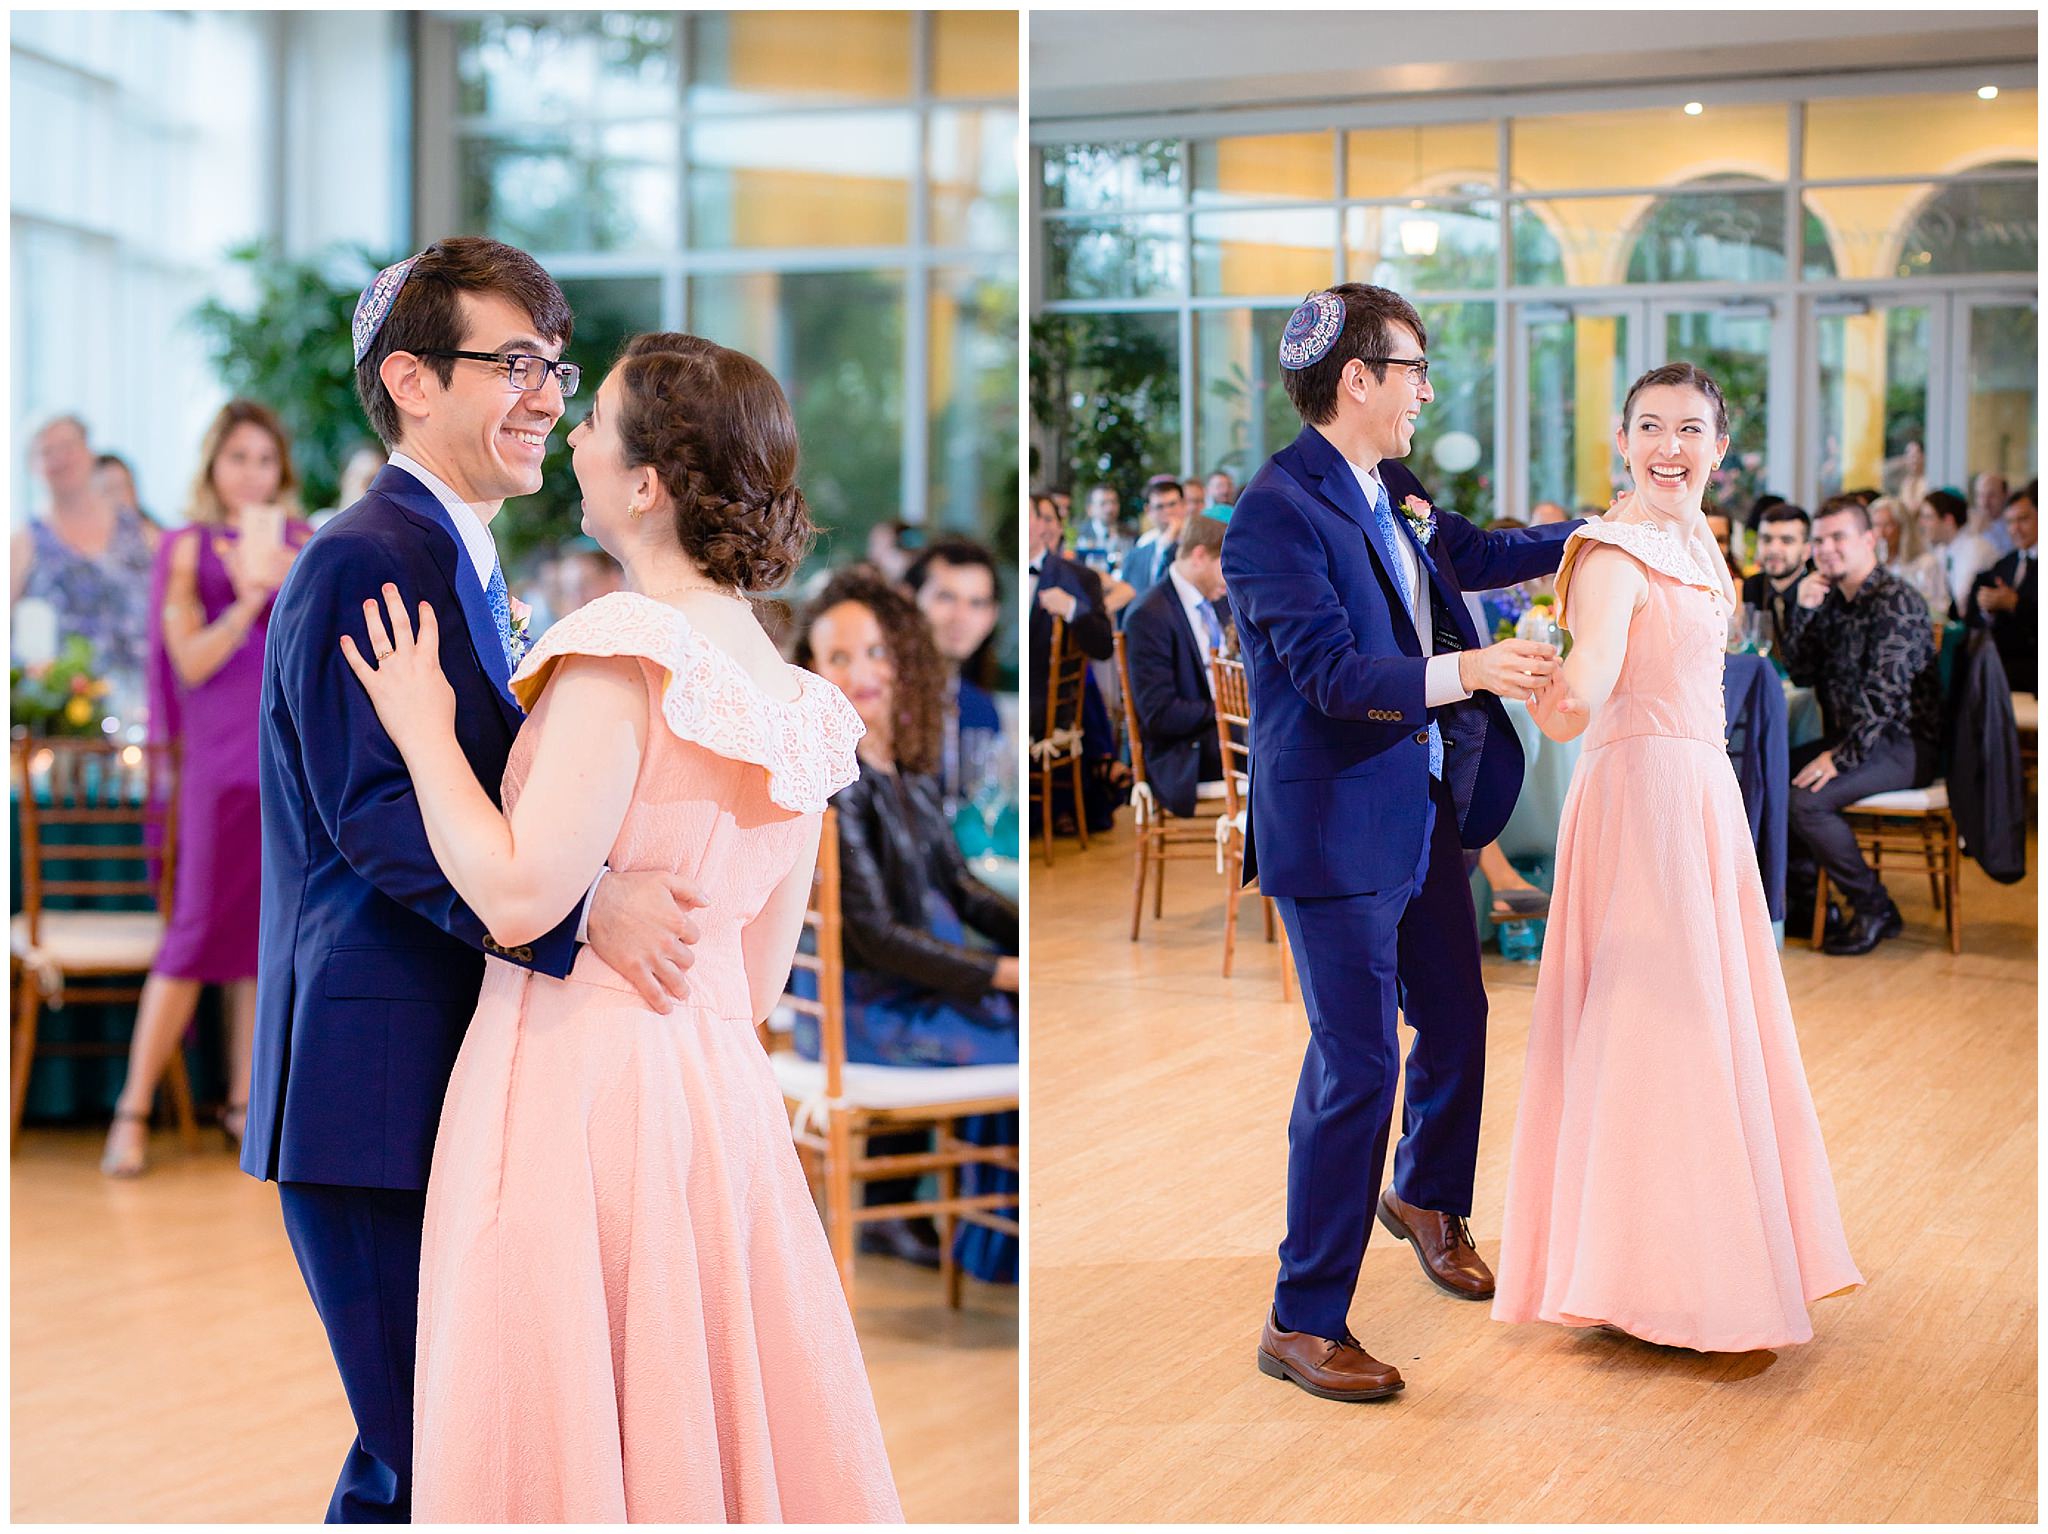 Bride & groom's first dance at Phipps Conservatory